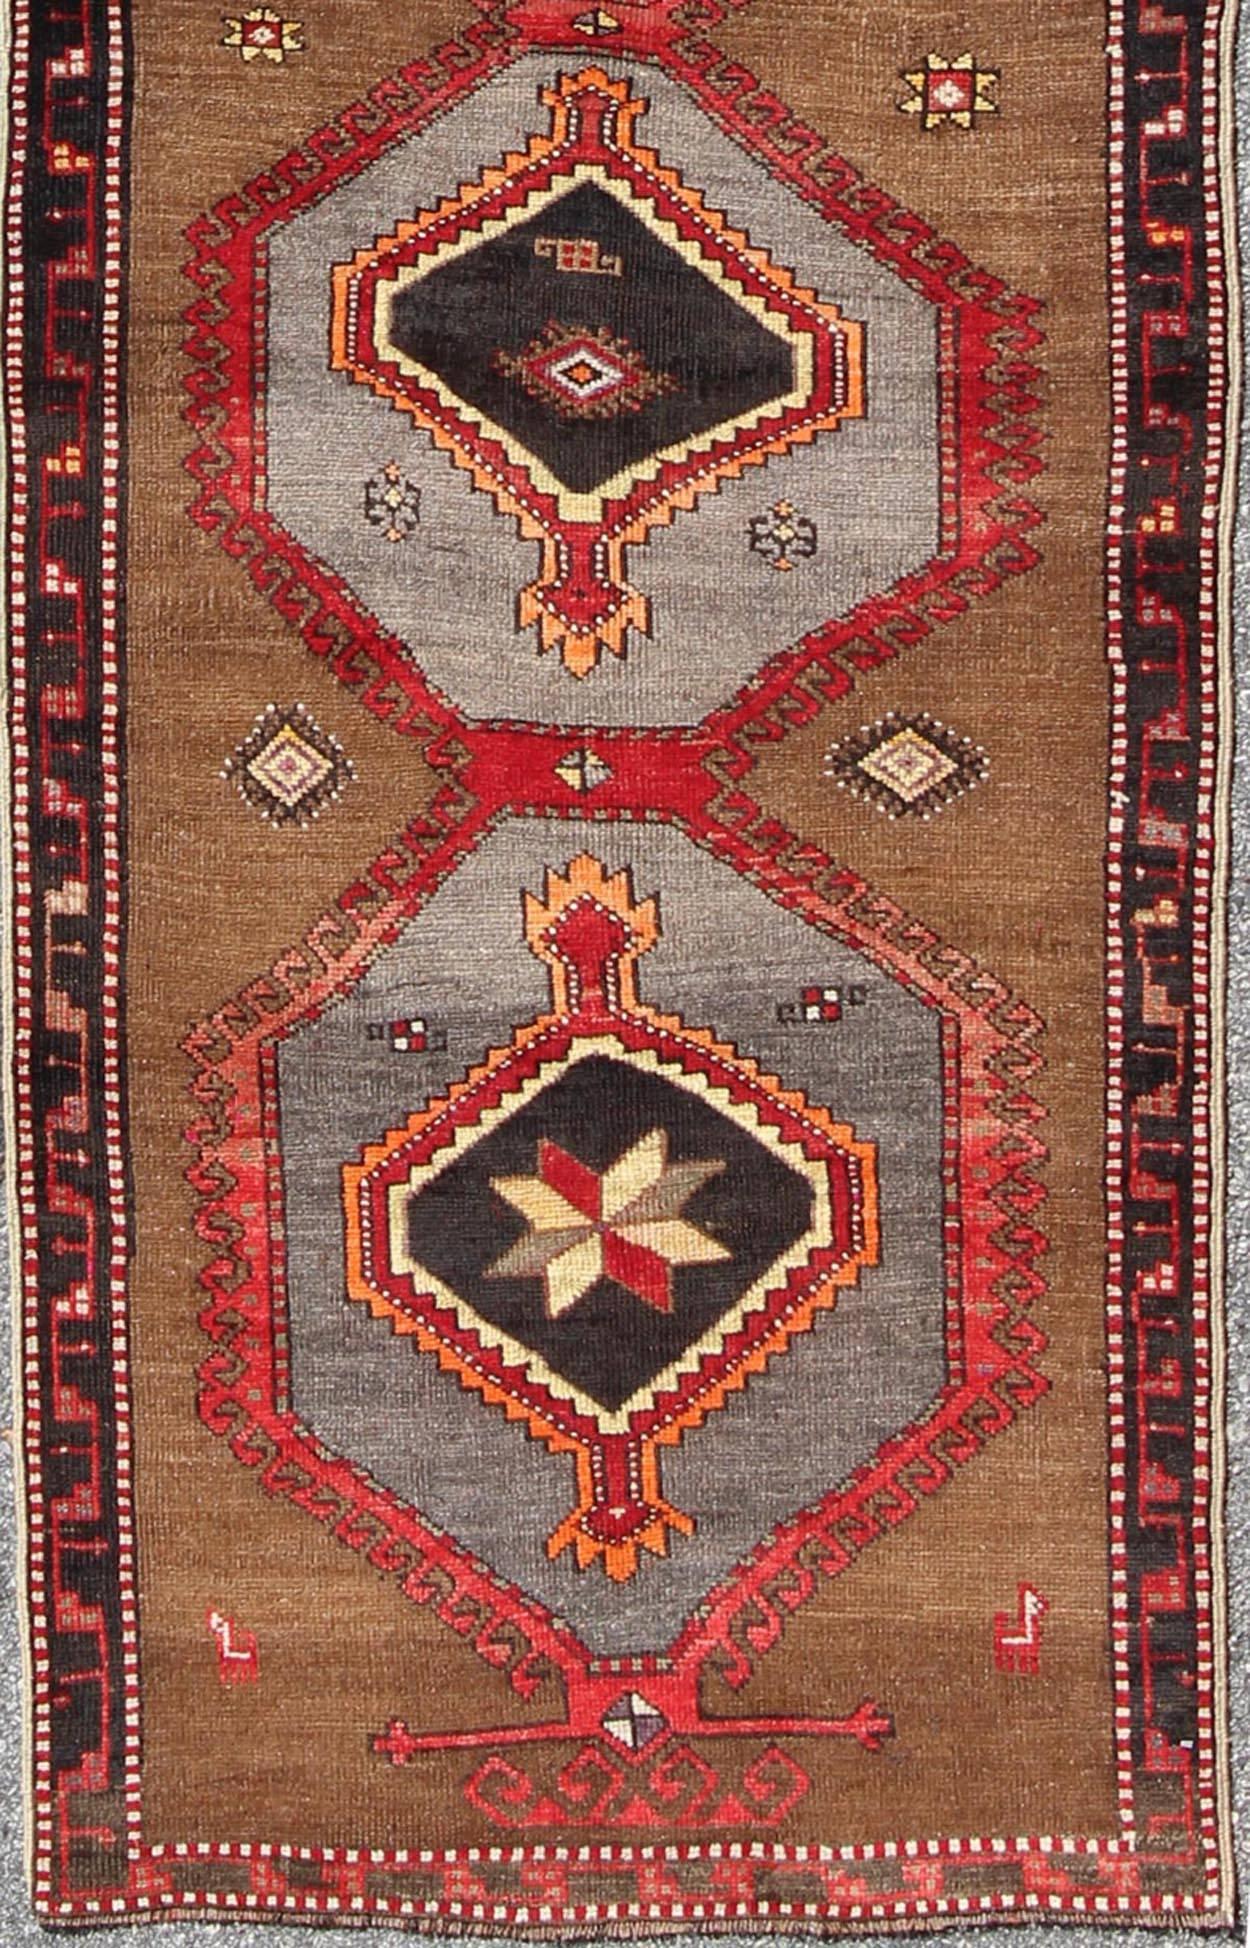 This Turkish runner boasts five geometric medallions along with a unique color scheme. The light and dark shades of brown in the background surround the multi-diamond shaped geometric medallions. The multi-color medallions contrast beautifully with